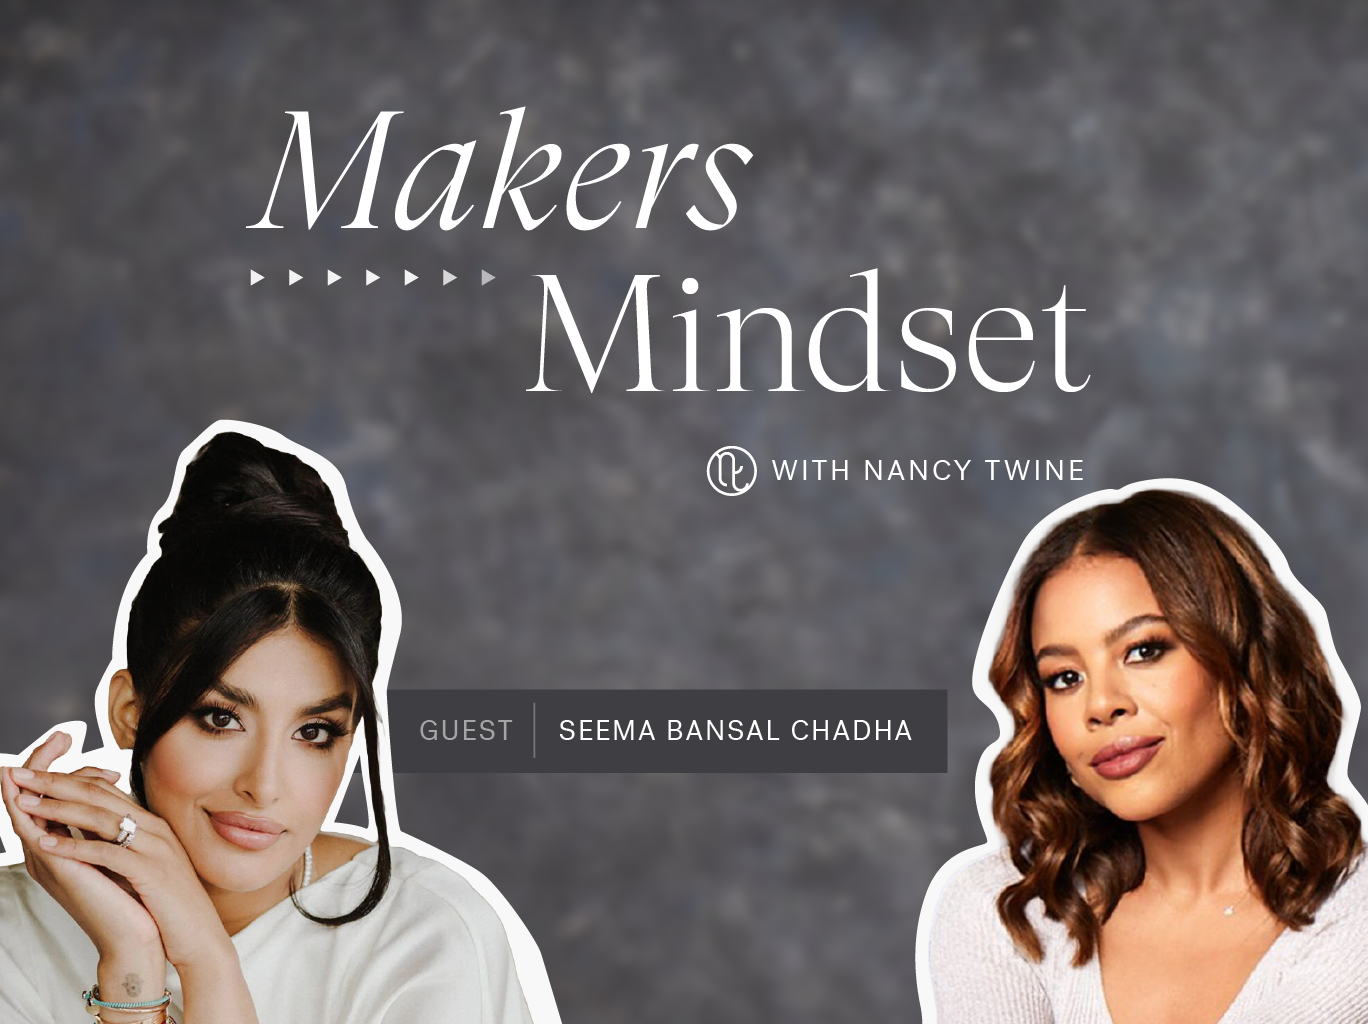 A cover image for the Makers Mindset podcast featuring the co-founder of Venus et Fleur (left) with host Nancy Twine (right).